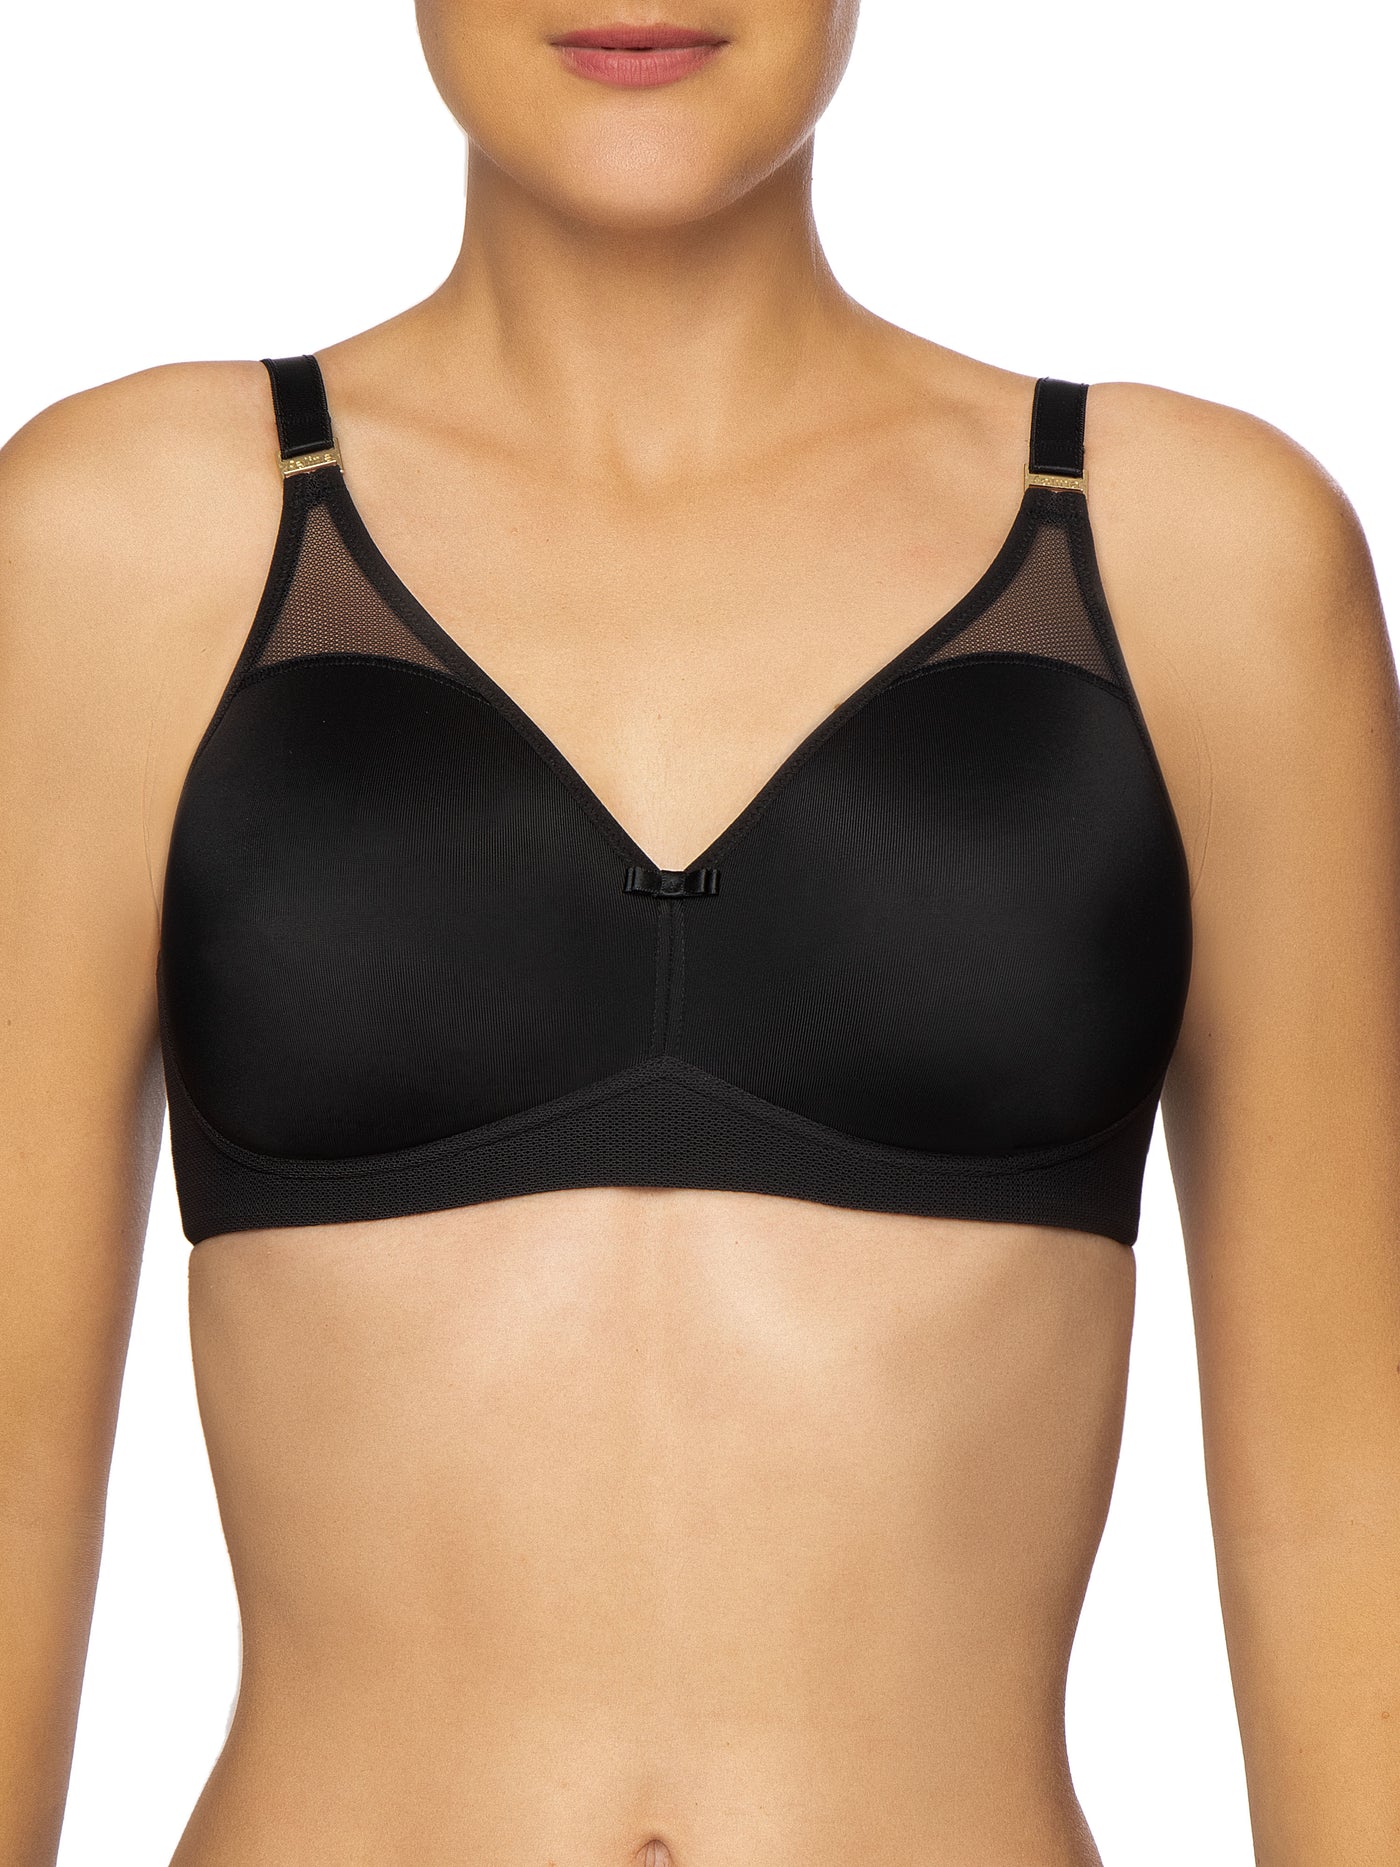 Mastectomy Bras, Breast Forms and Swimwear: What You Need to Know - DIVINE